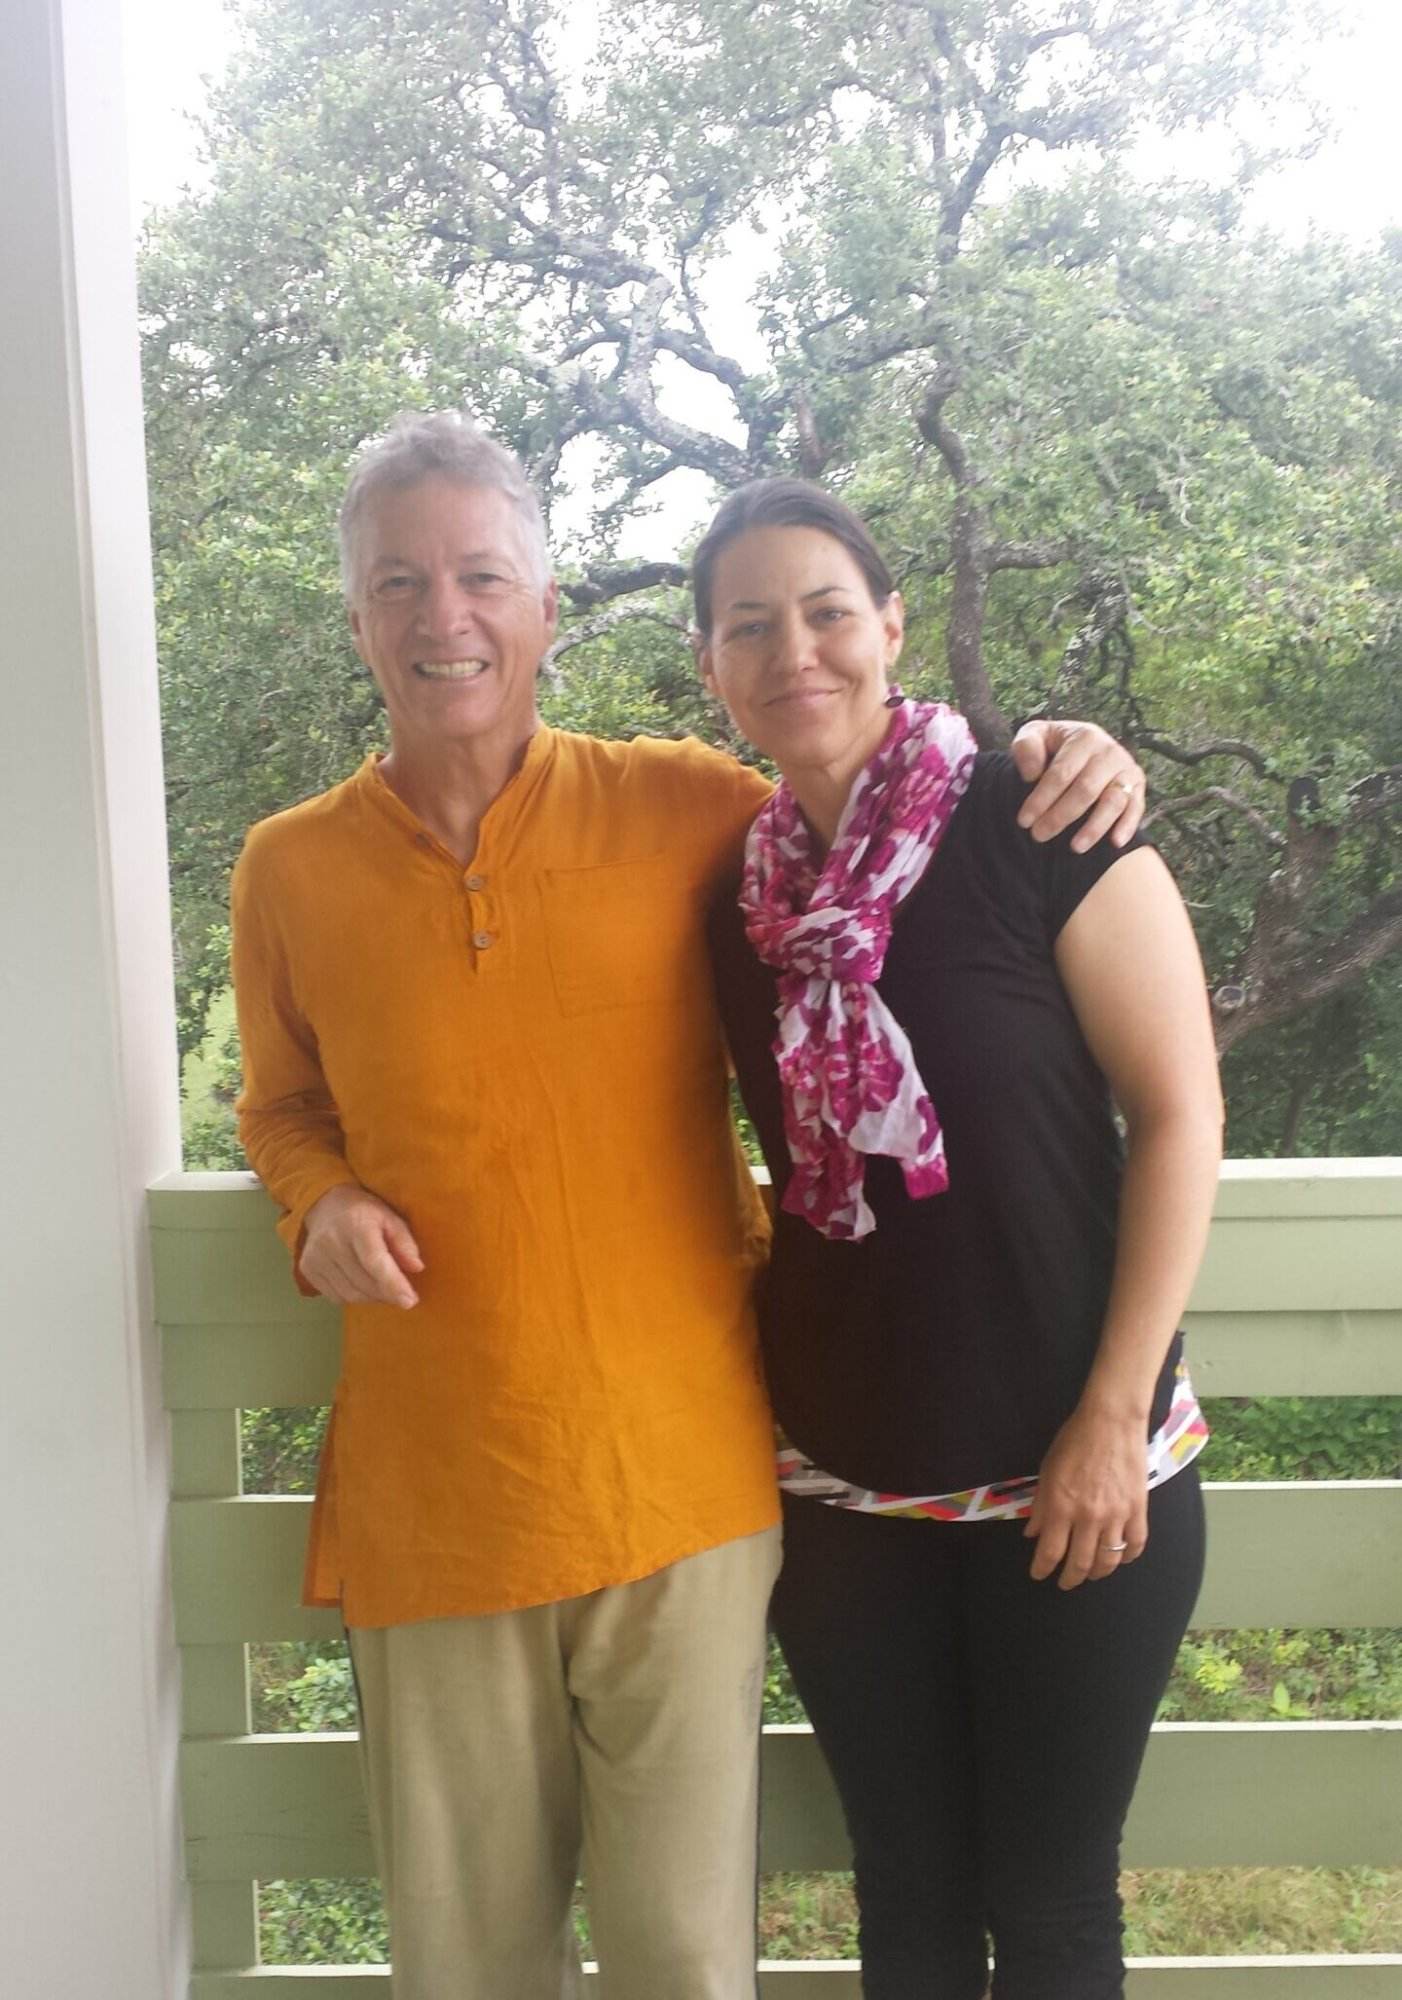 Author with her yoga therapy teacher Joseph LePage who helped me reduce stress of diabetesg black yoga pants and top with a pink scarf. Joseph is weather tan pants and an orange button-down s